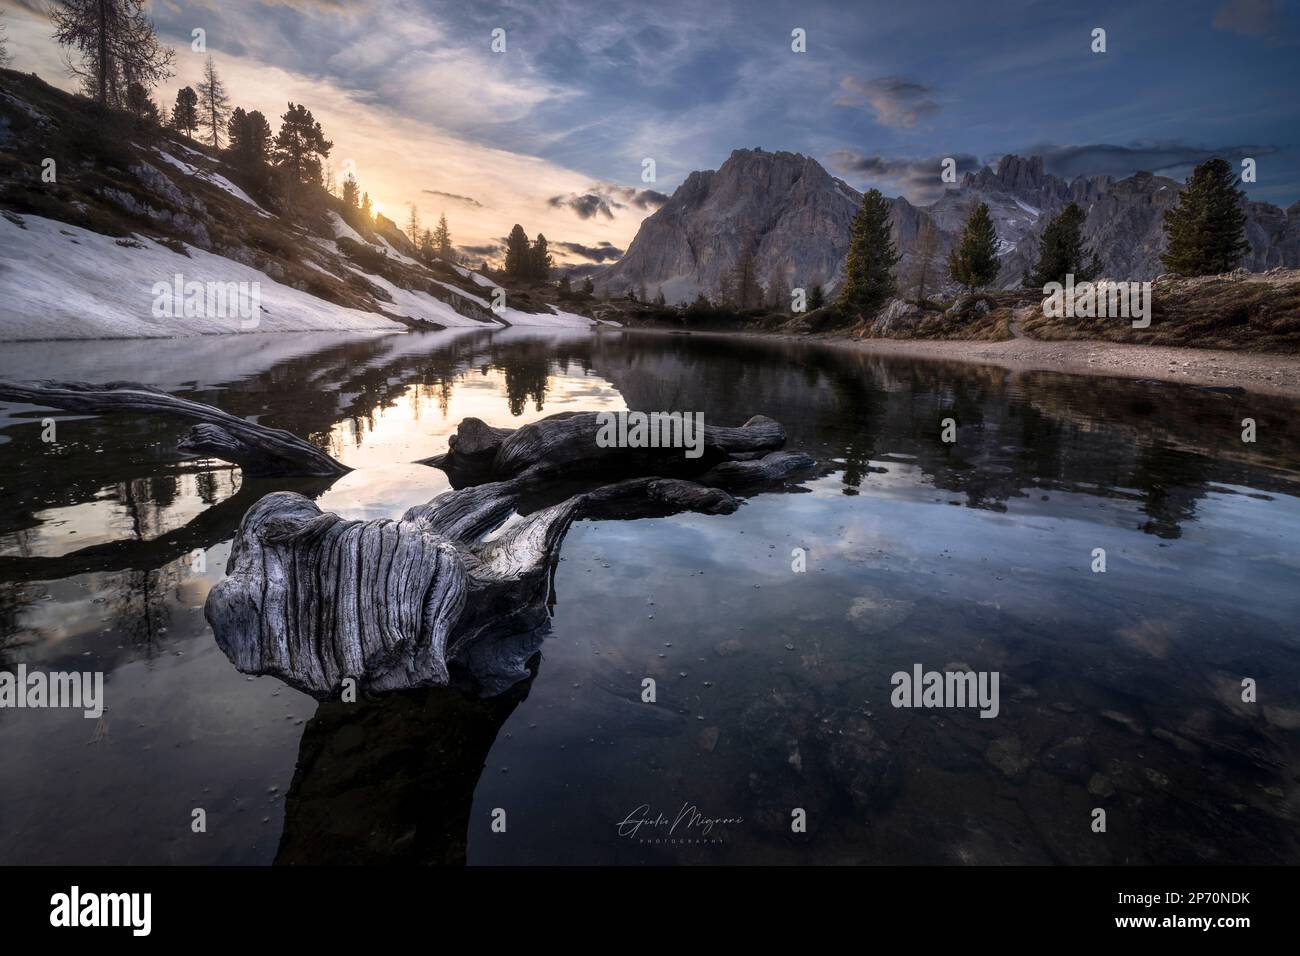 Picture of Mount Lagazuoi reflections in Lake Limides at sunset, Cortina d'Ampezzo, Italy Stock Photo